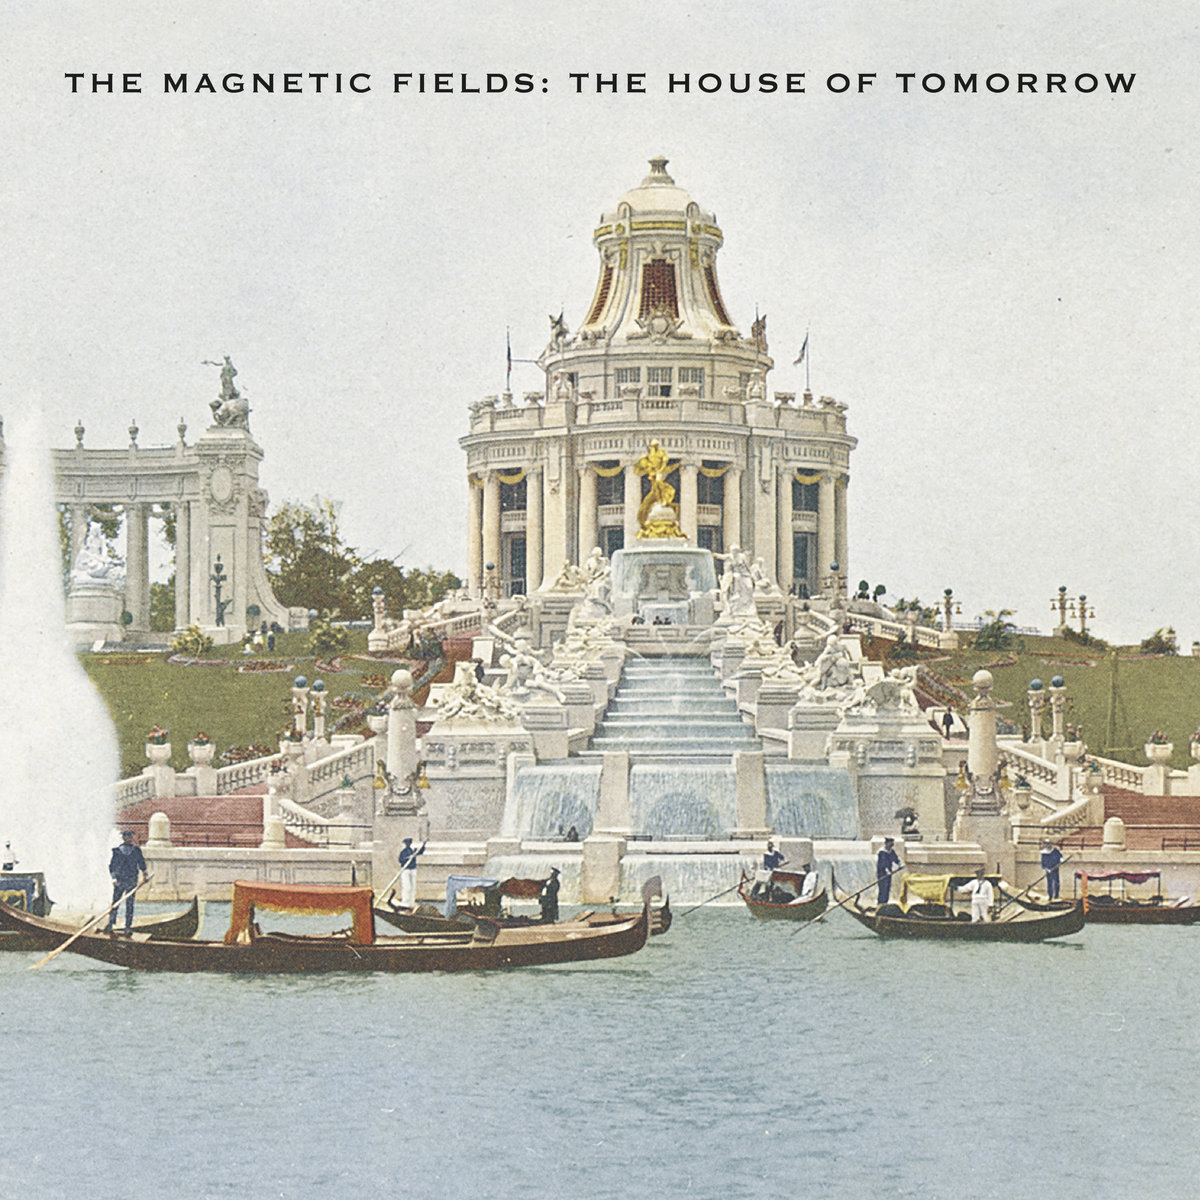 The Magnetic Fields "The House of Tomorrow" LP